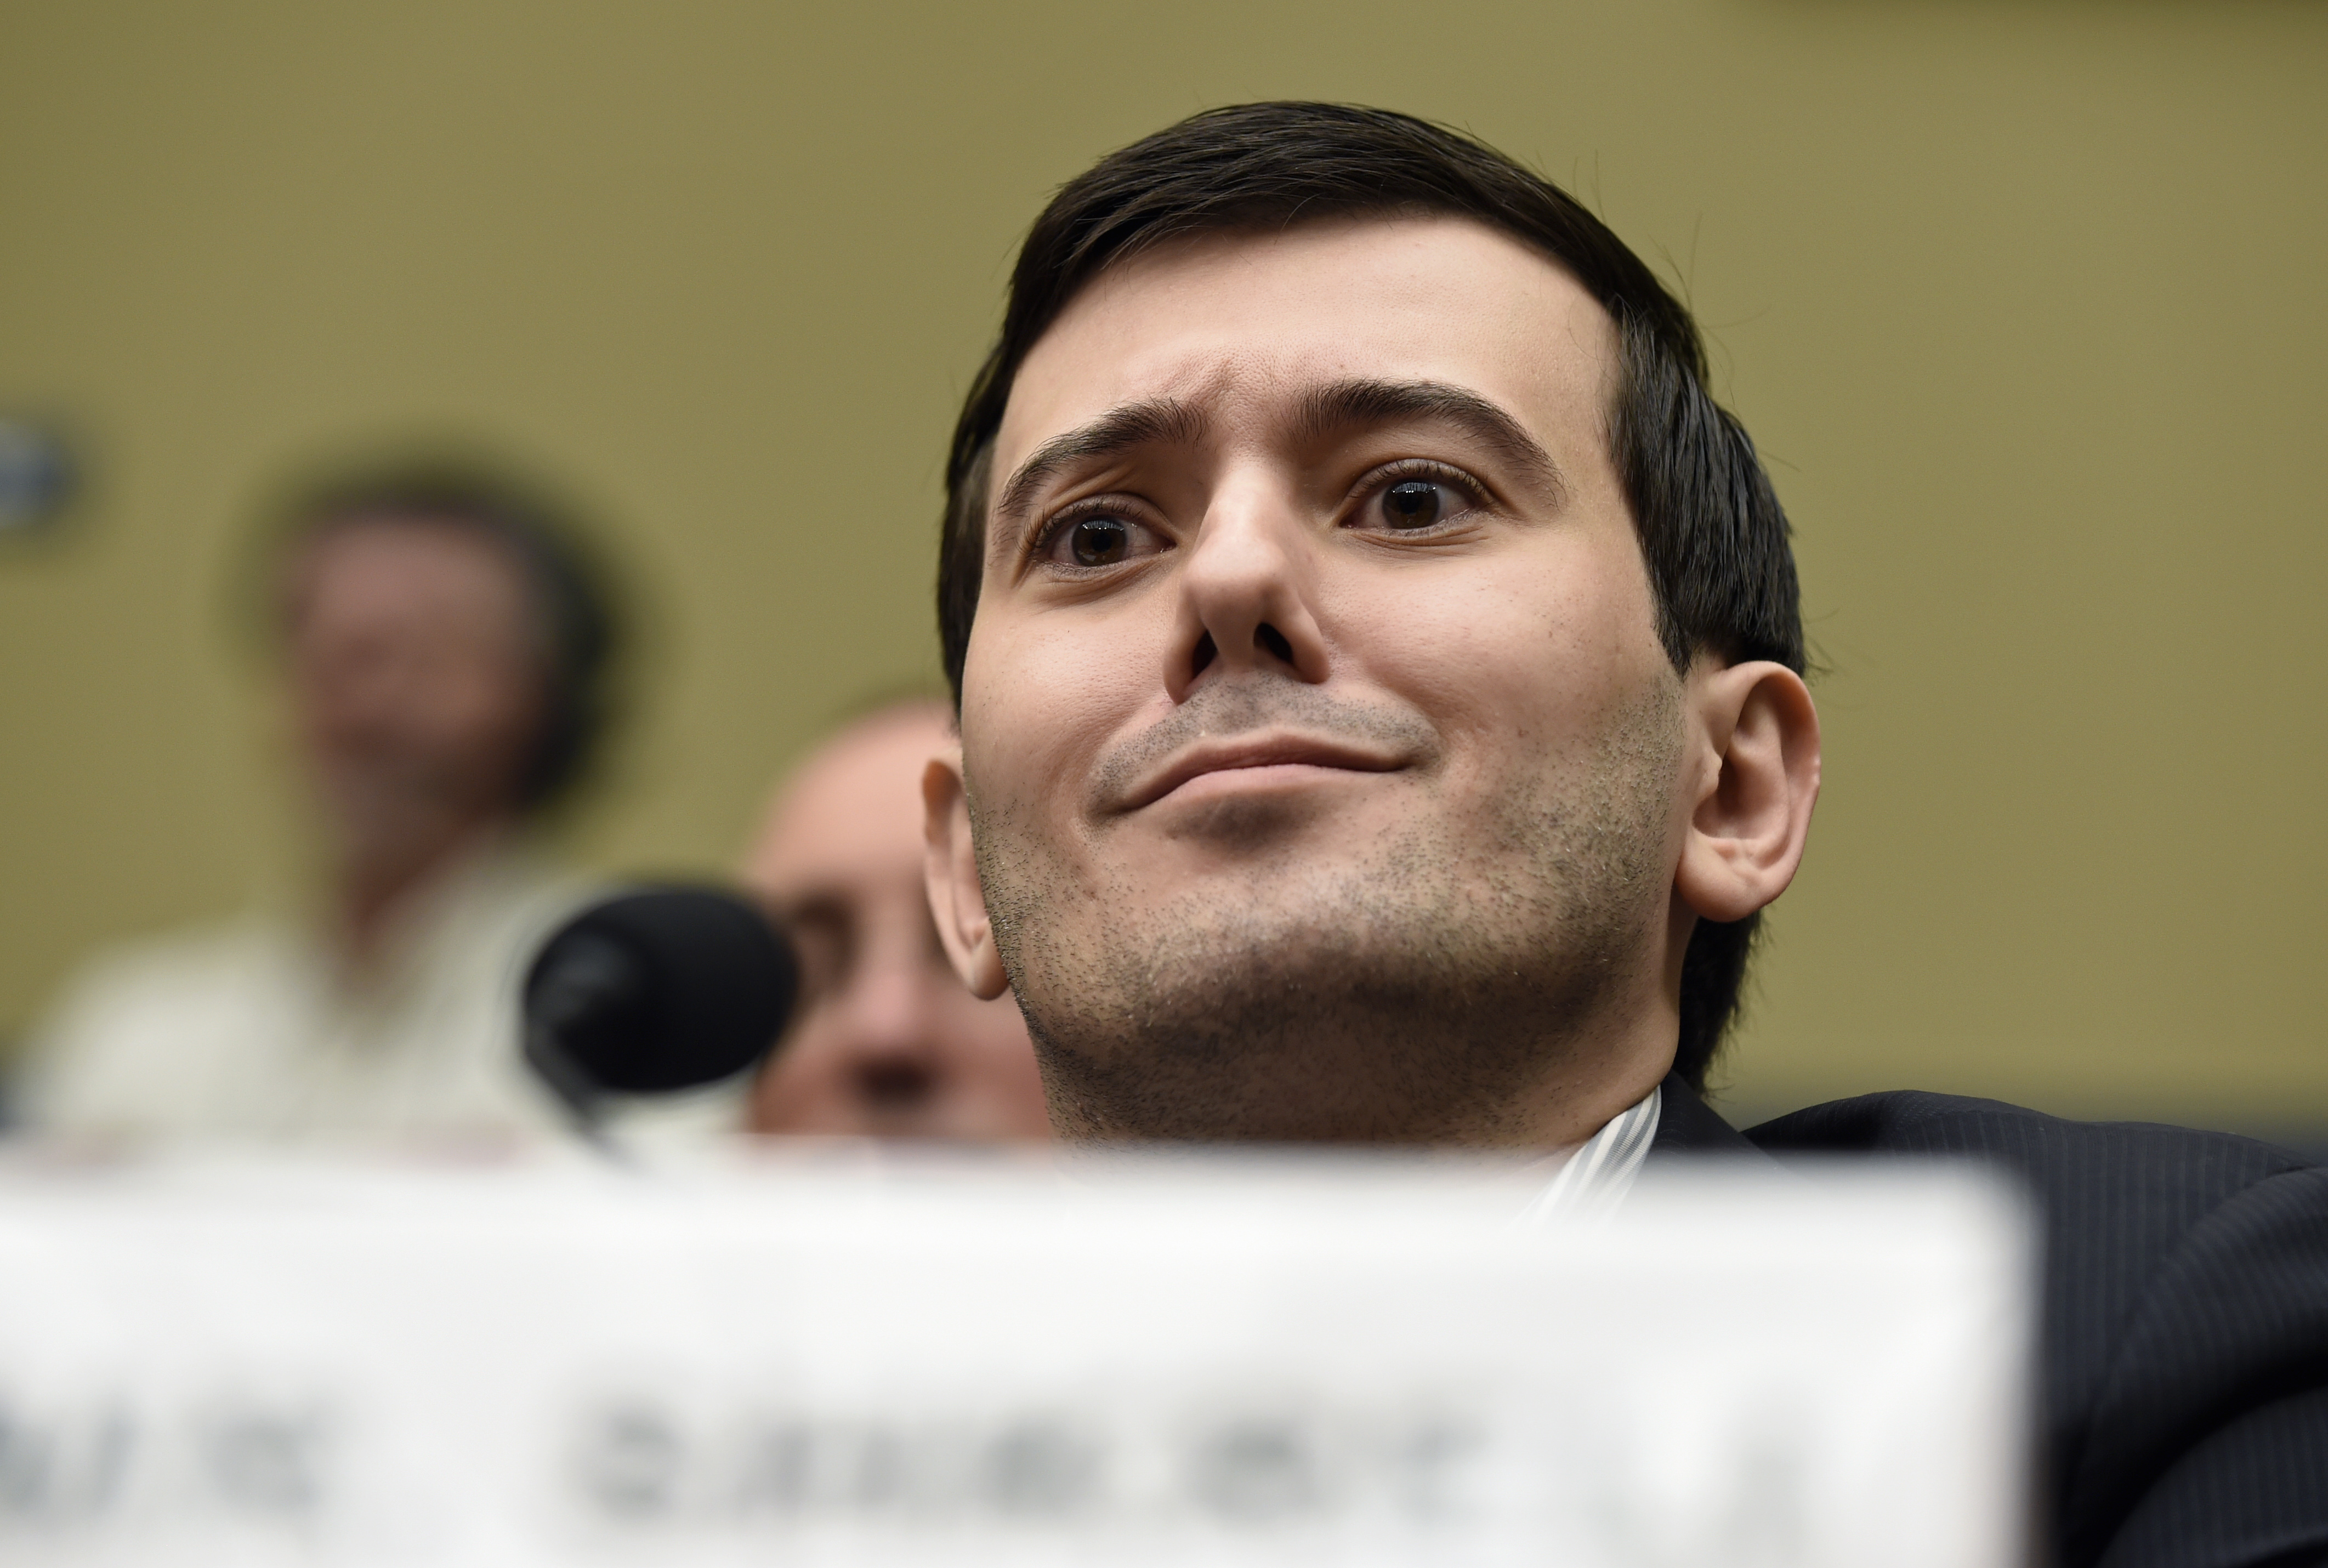 Pharmaceutical chief Martin Shkreli listens on Capitol Hill in Washington, Thursday, Feb. 4, 2016, during the House Committee on Oversight and Reform Committee hearing on his former company's decision to raise the price of a lifesaving medicine. Shkreli refused to testify before U.S. lawmakers who excoriated him over severe hikes for a drug sold by a company that he acquired. (AP Photo/Susan Walsh)